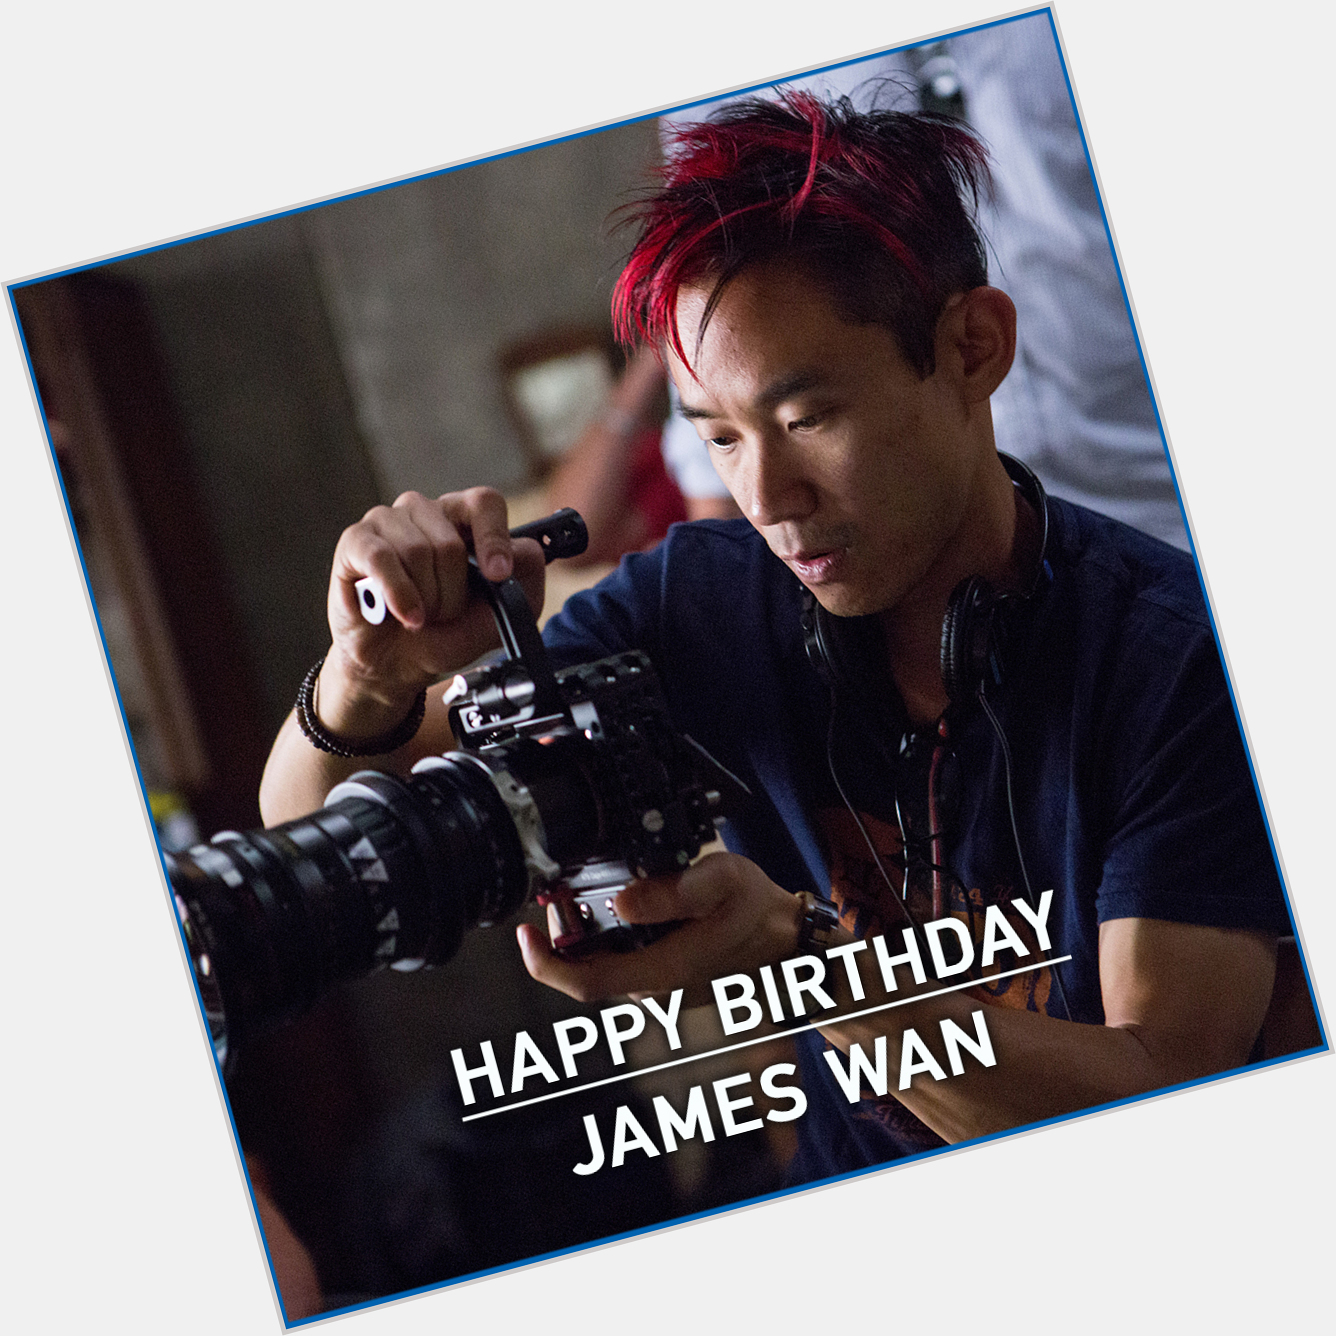 Happy Birthday to James Wan, whose next directorial is the Horror film 